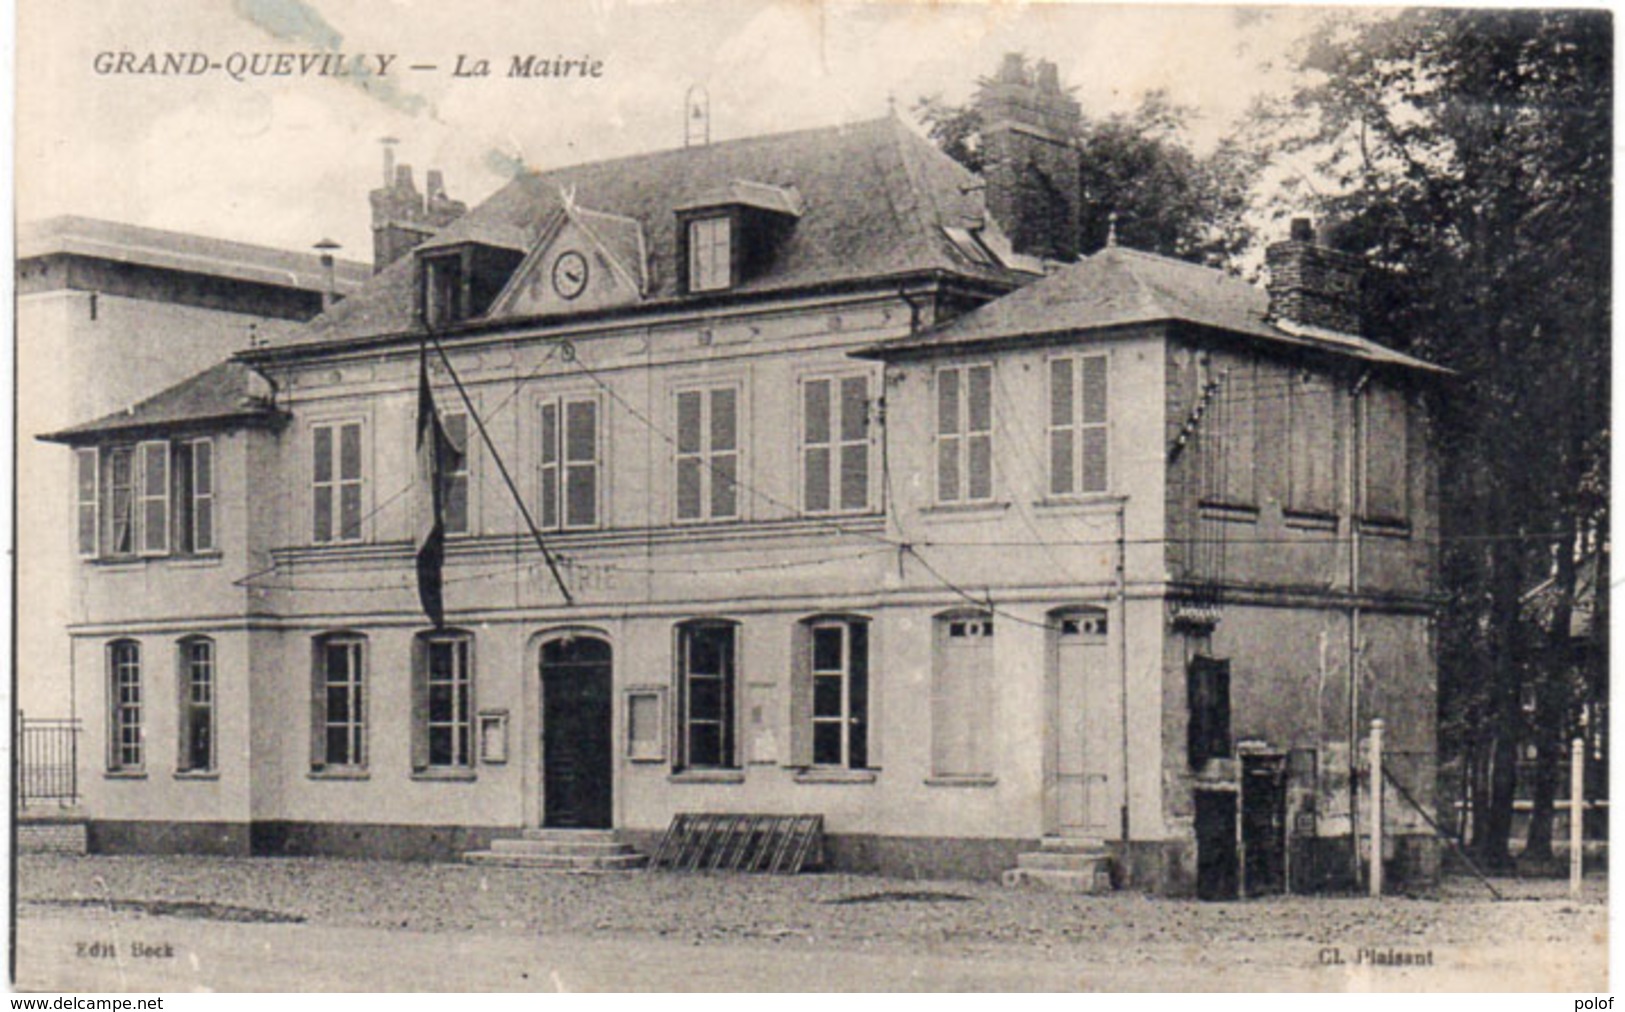 GRAND-QUEVILLY - La Mairie  (114971) - Le Grand-Quevilly